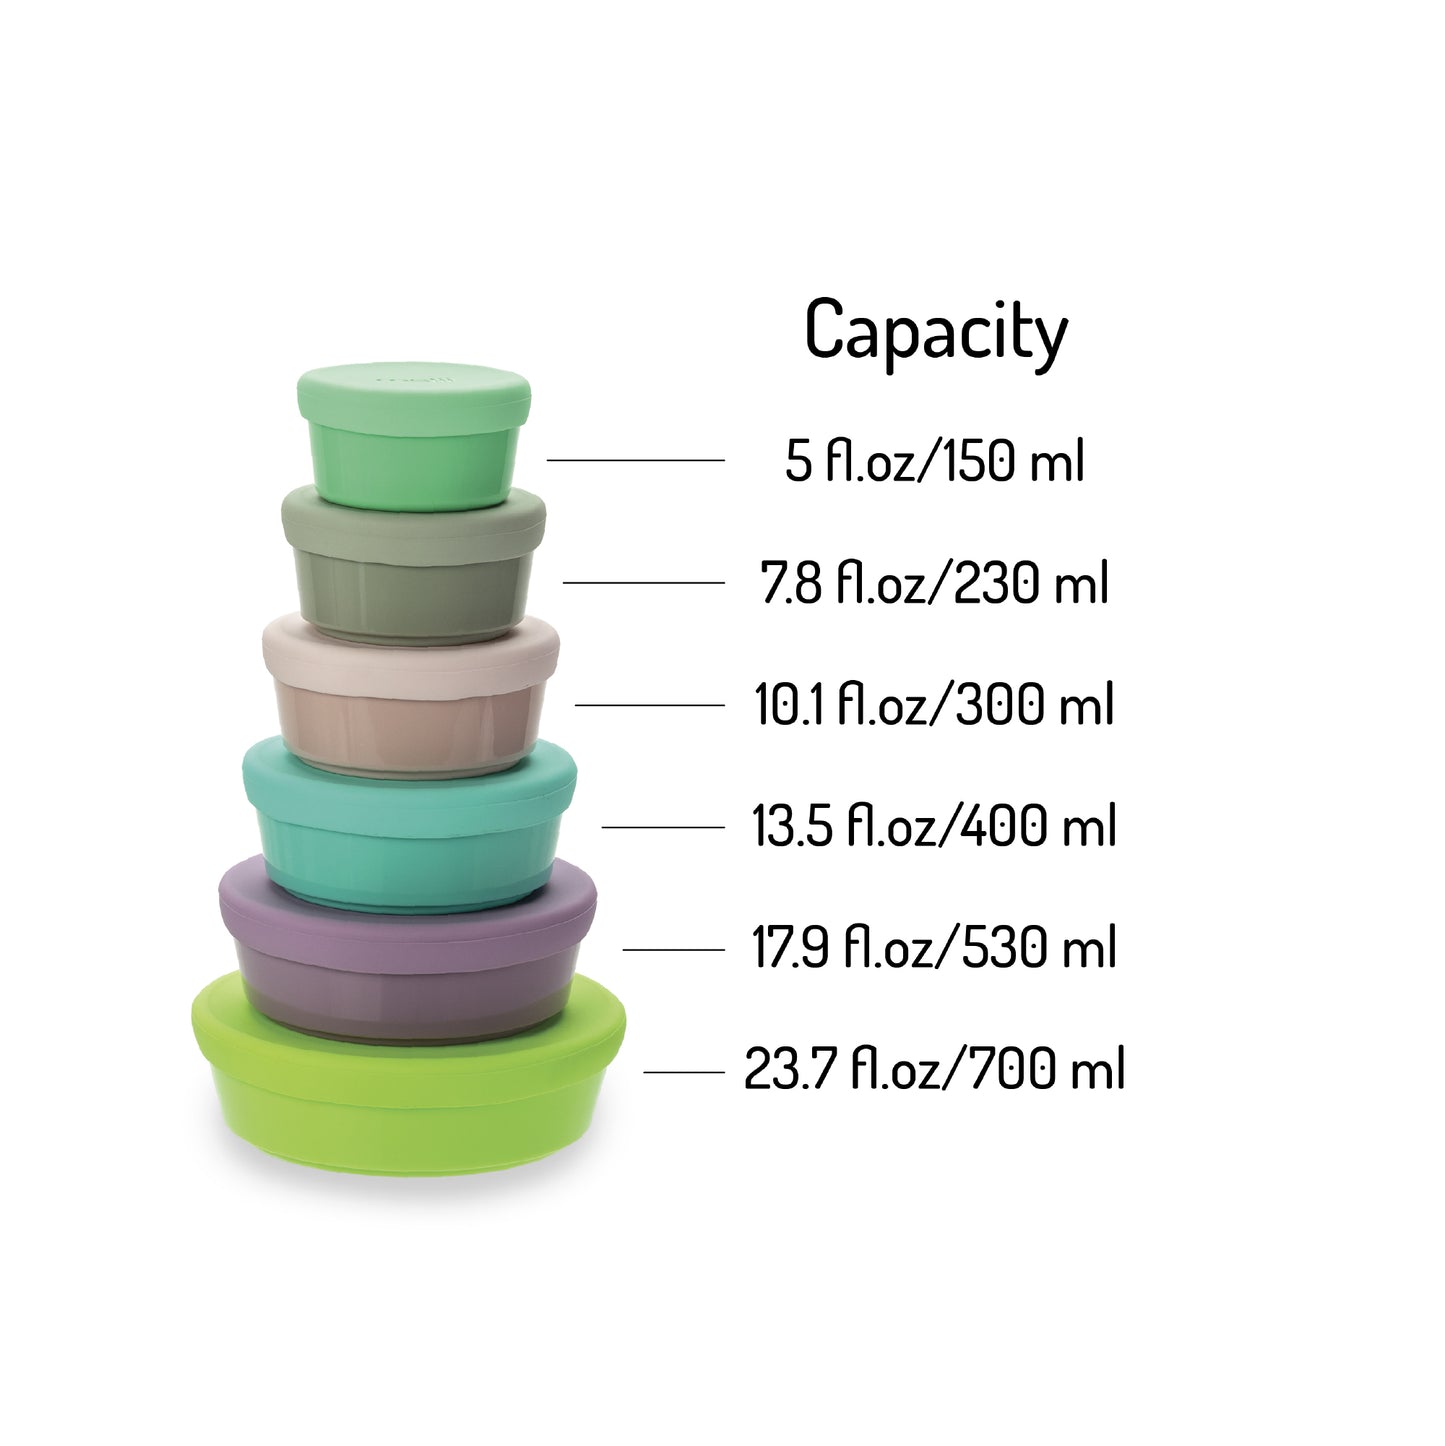 Melii Stacking & Nesting Food Storage Containers with Silicone Lids - 12 Piece Set for Kids, BPA Free, Dishwasher & Microwave Safe, Compact Storage, Versatile Sizes